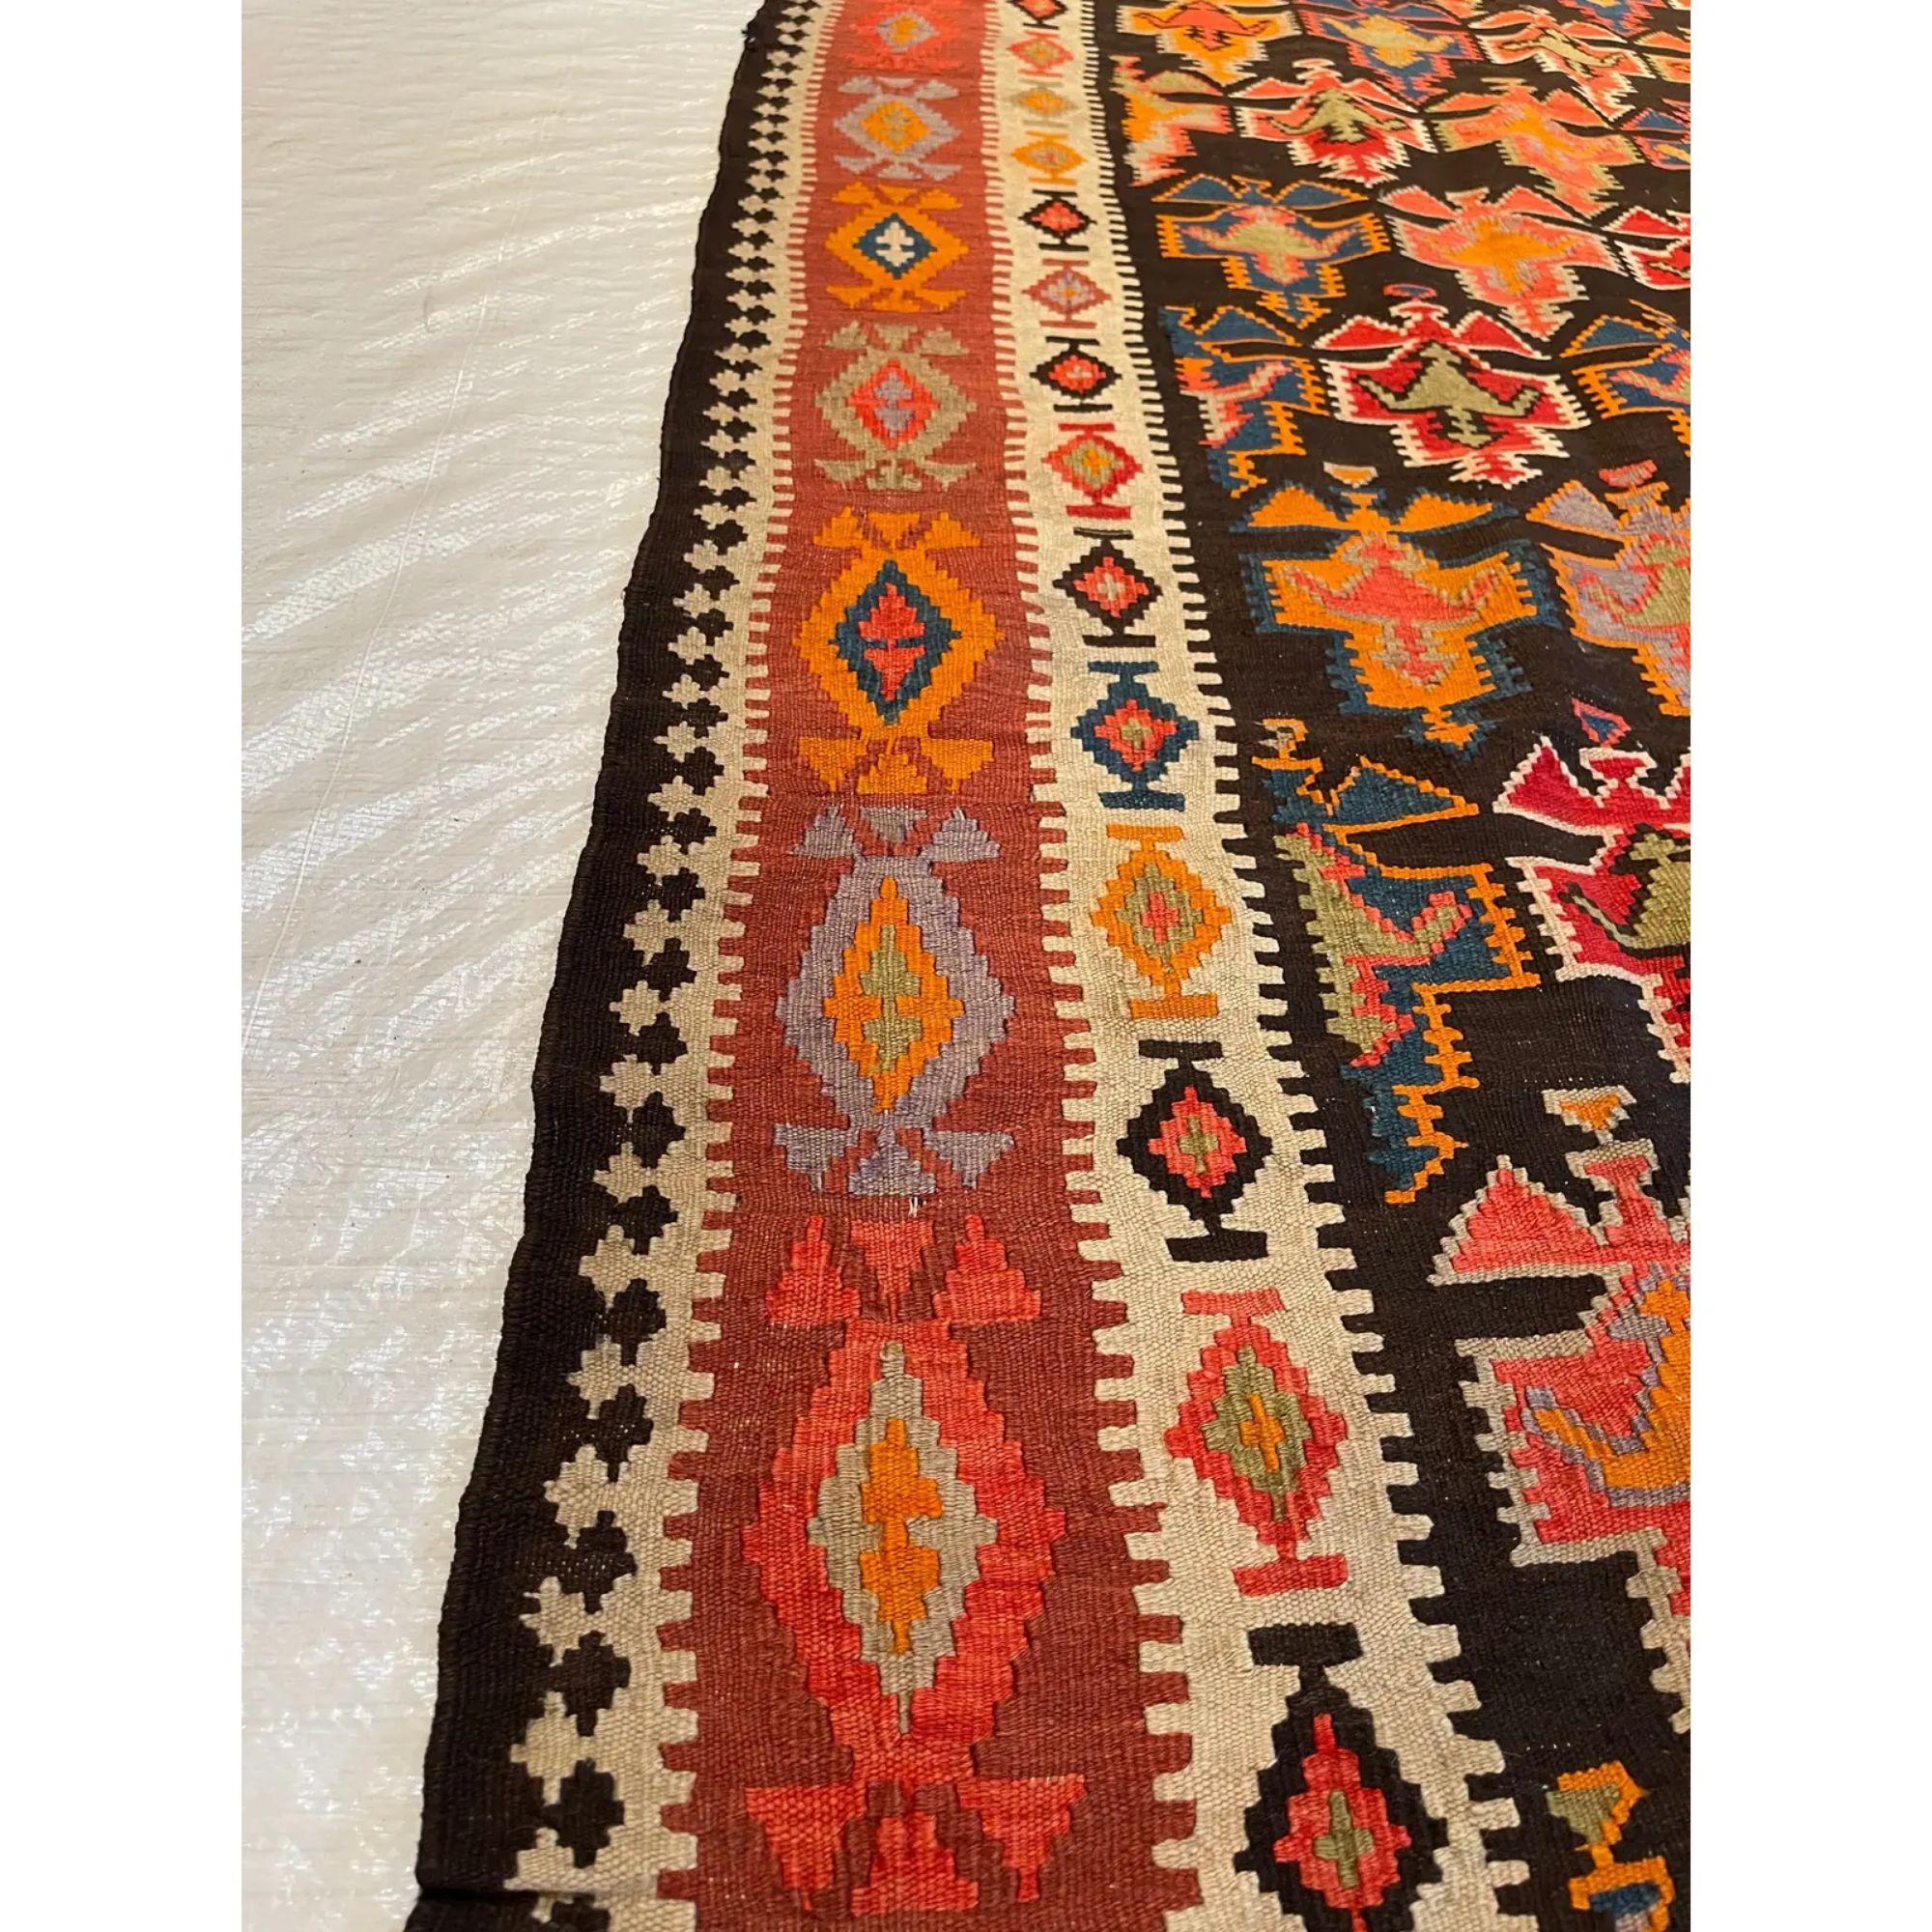 Unknown Antique Kilim Geometric Runner Rug - 14'4'' X 4'10'' For Sale